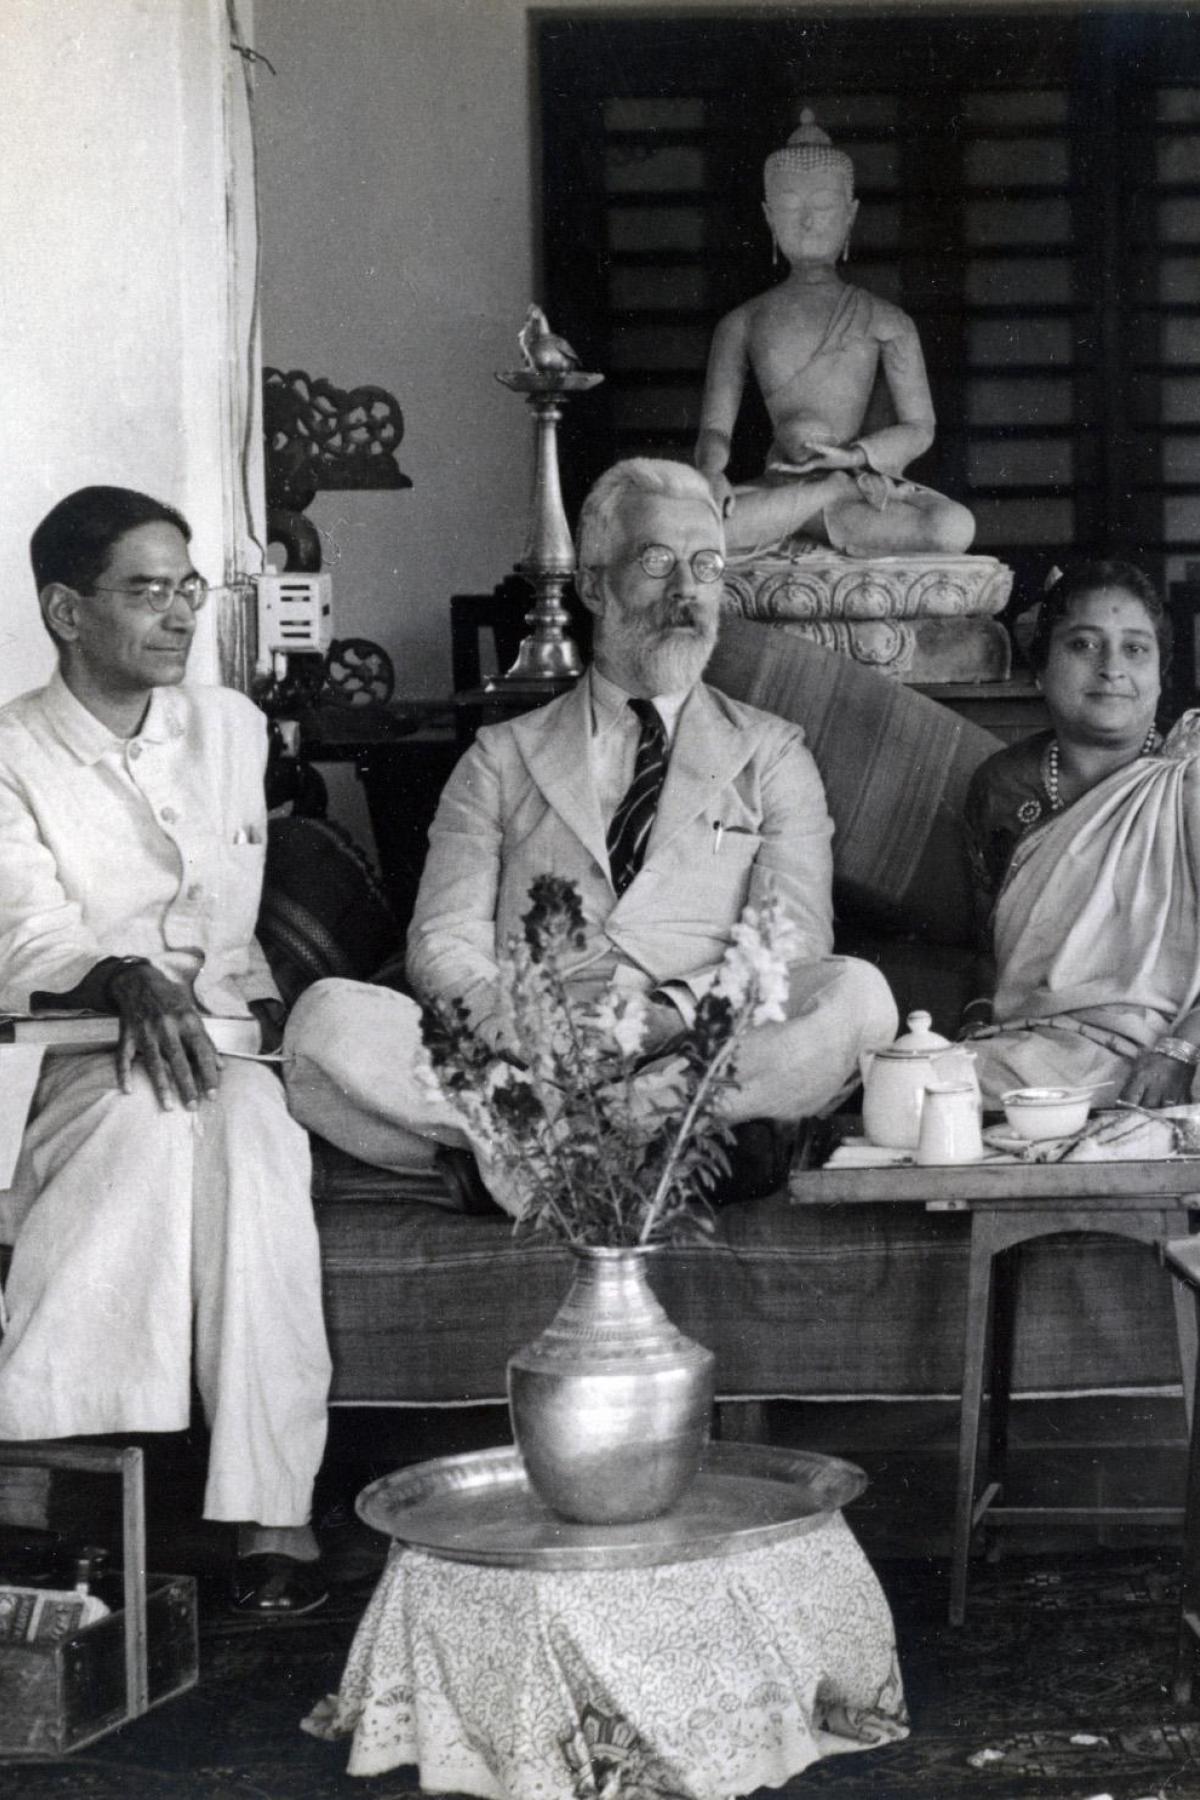 Sir Ronald A Fisher in India, 1946, with Professor and Mrs Mahalanobis.